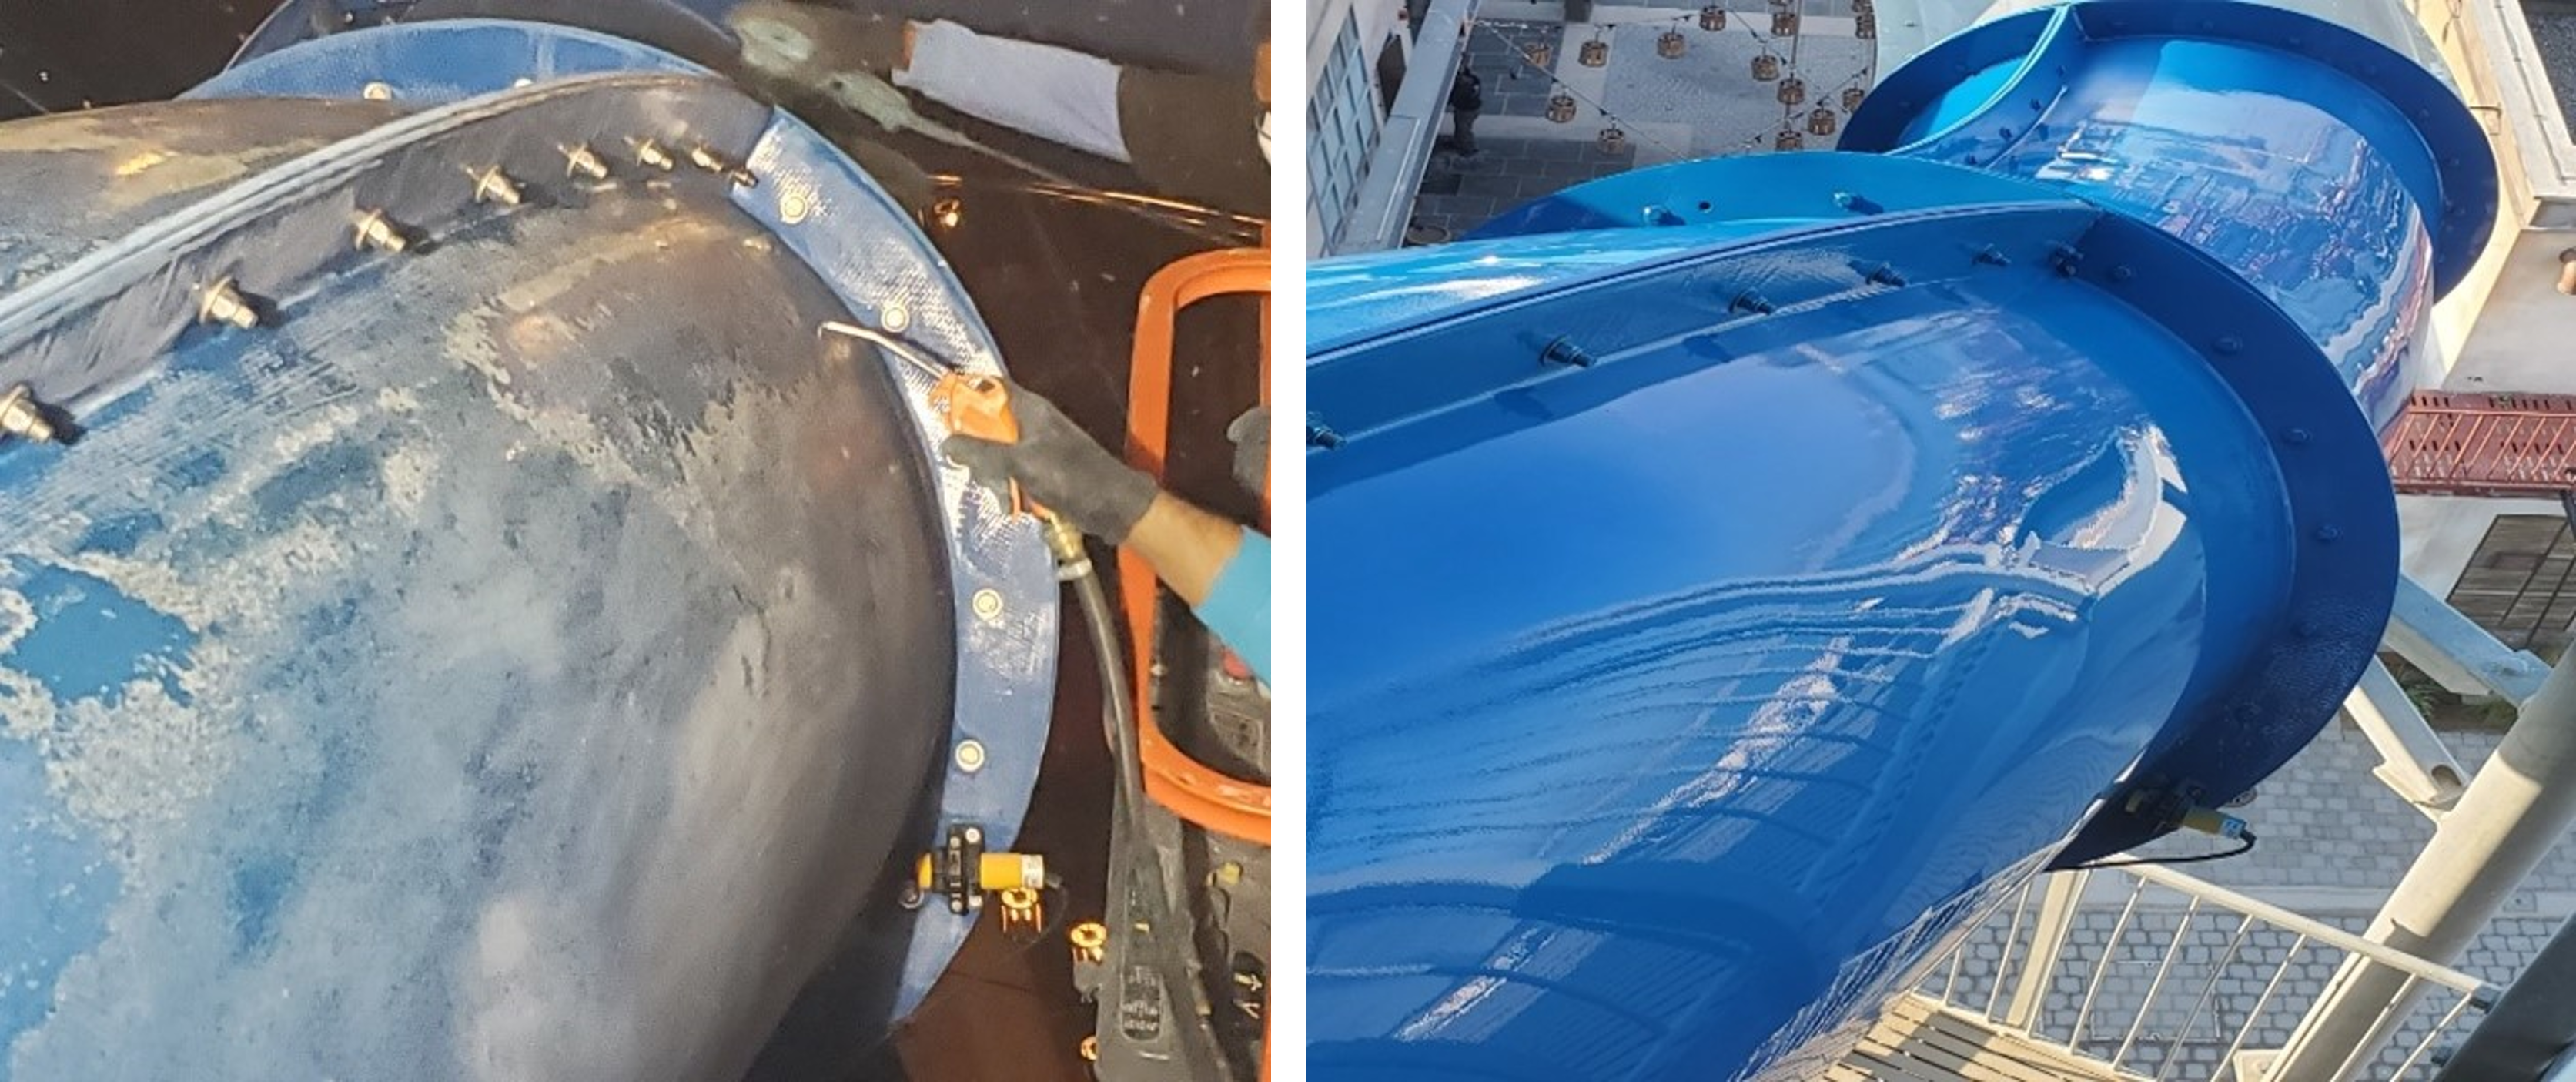 Old blue water slide compared to refurbished shiny water slide